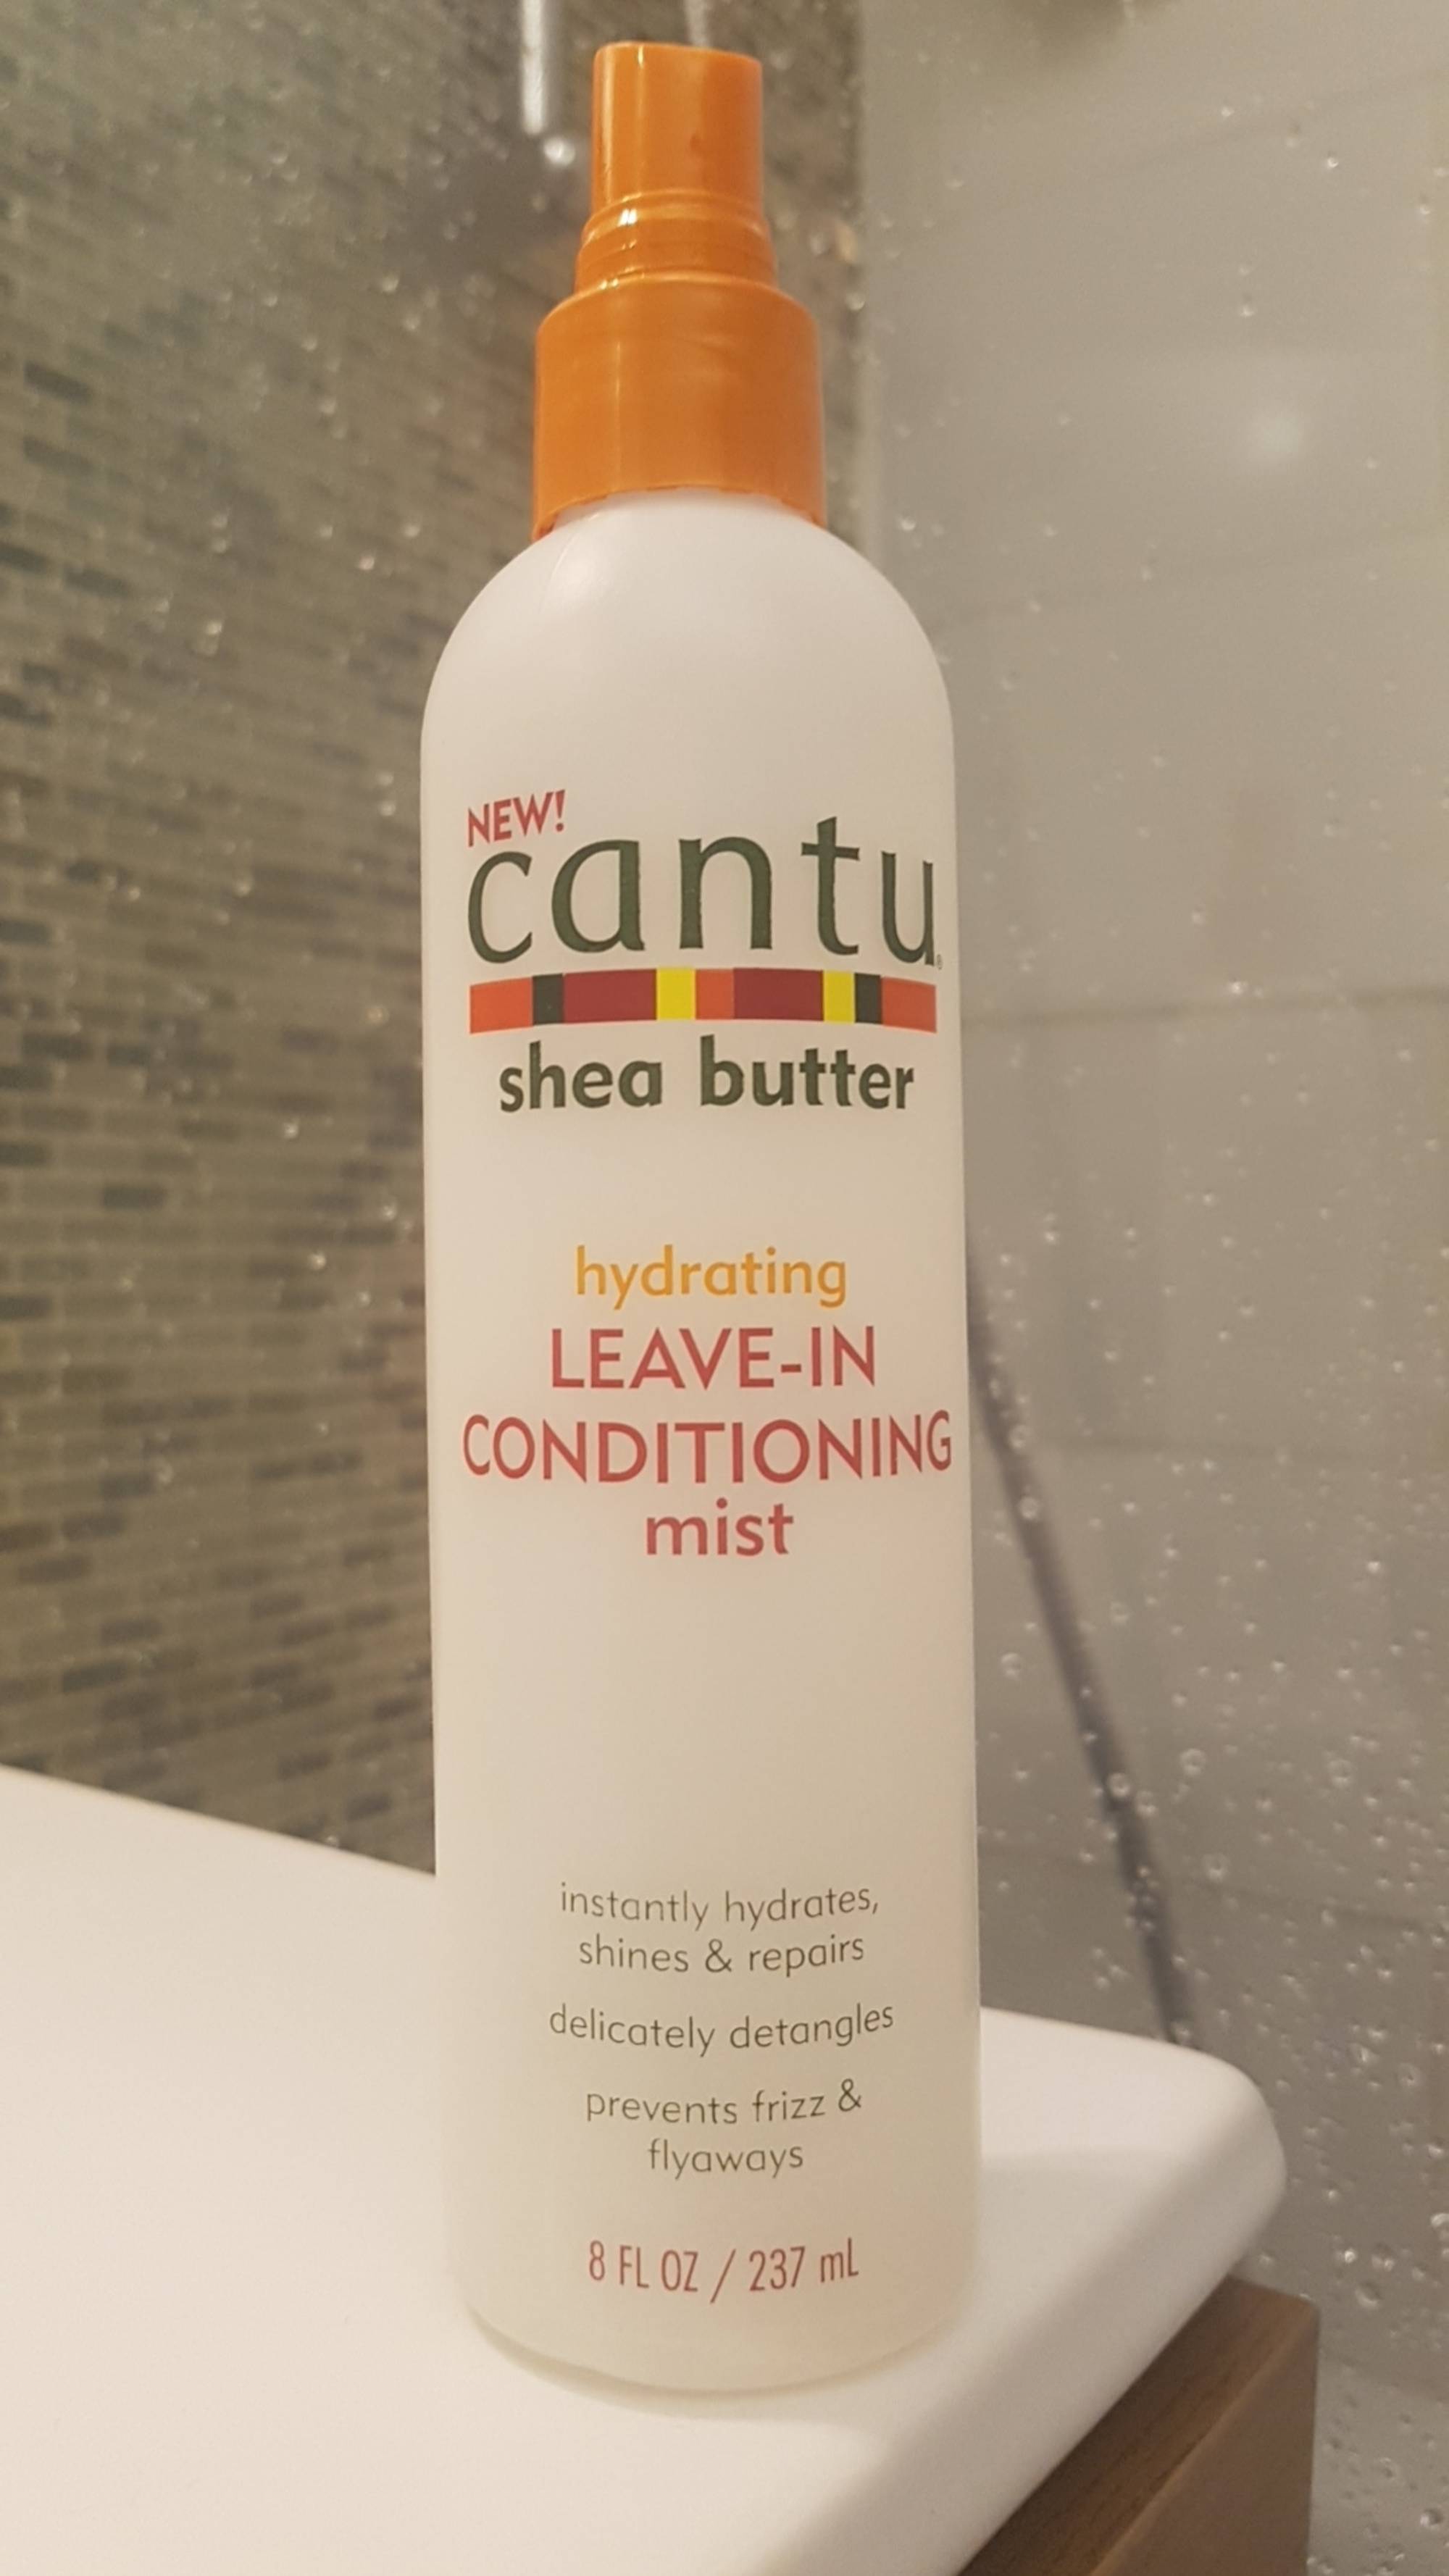 CANTU - Shea Butter - Hydrating Leave-in conditioning mist